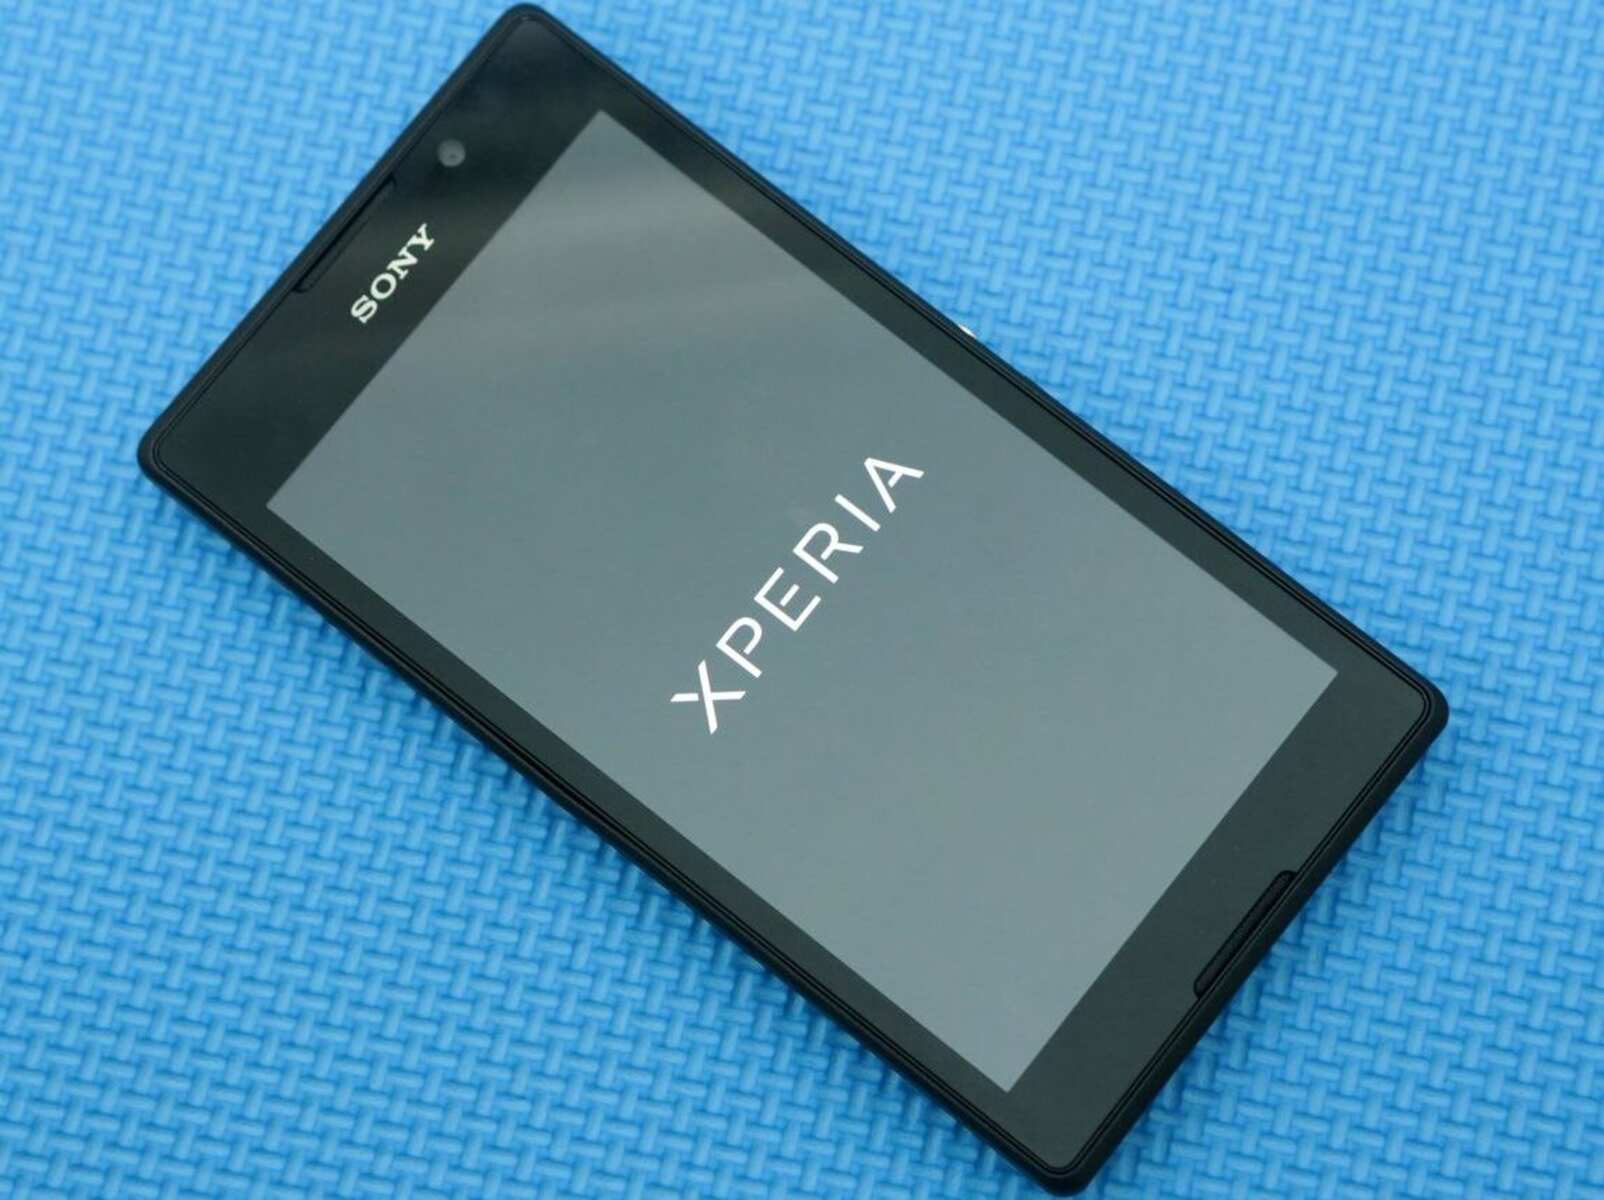 Sony Xperia C Rooting Tutorial: Customization Guide